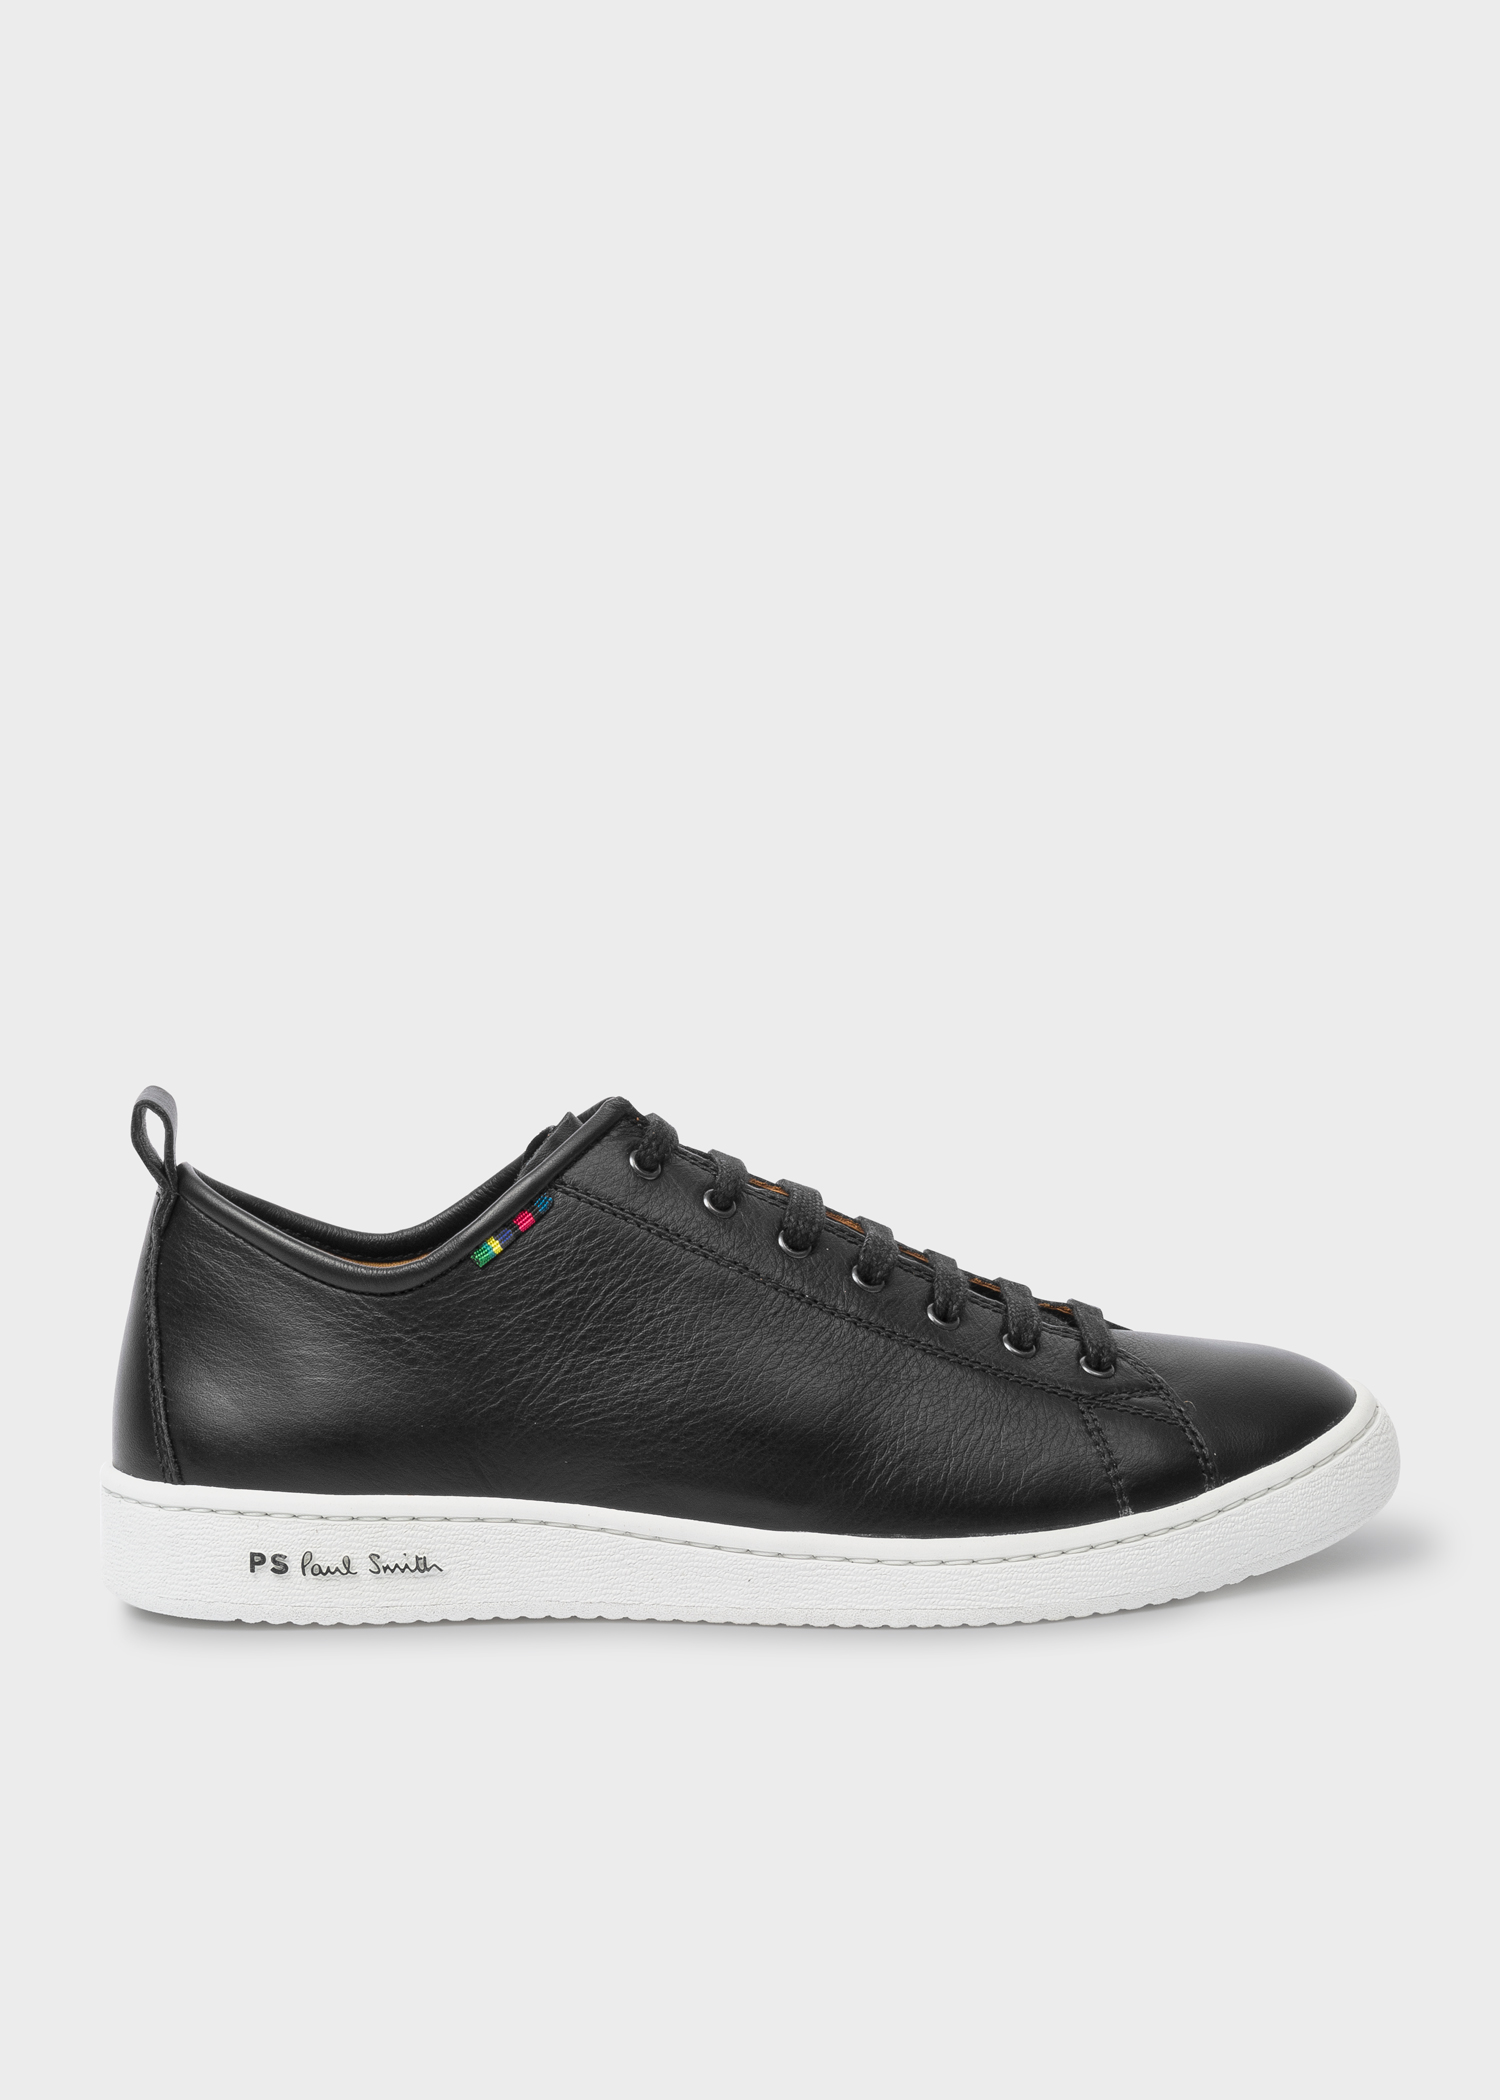 Mens White Paul Smith Mainline Beck Trainers | Soletrader